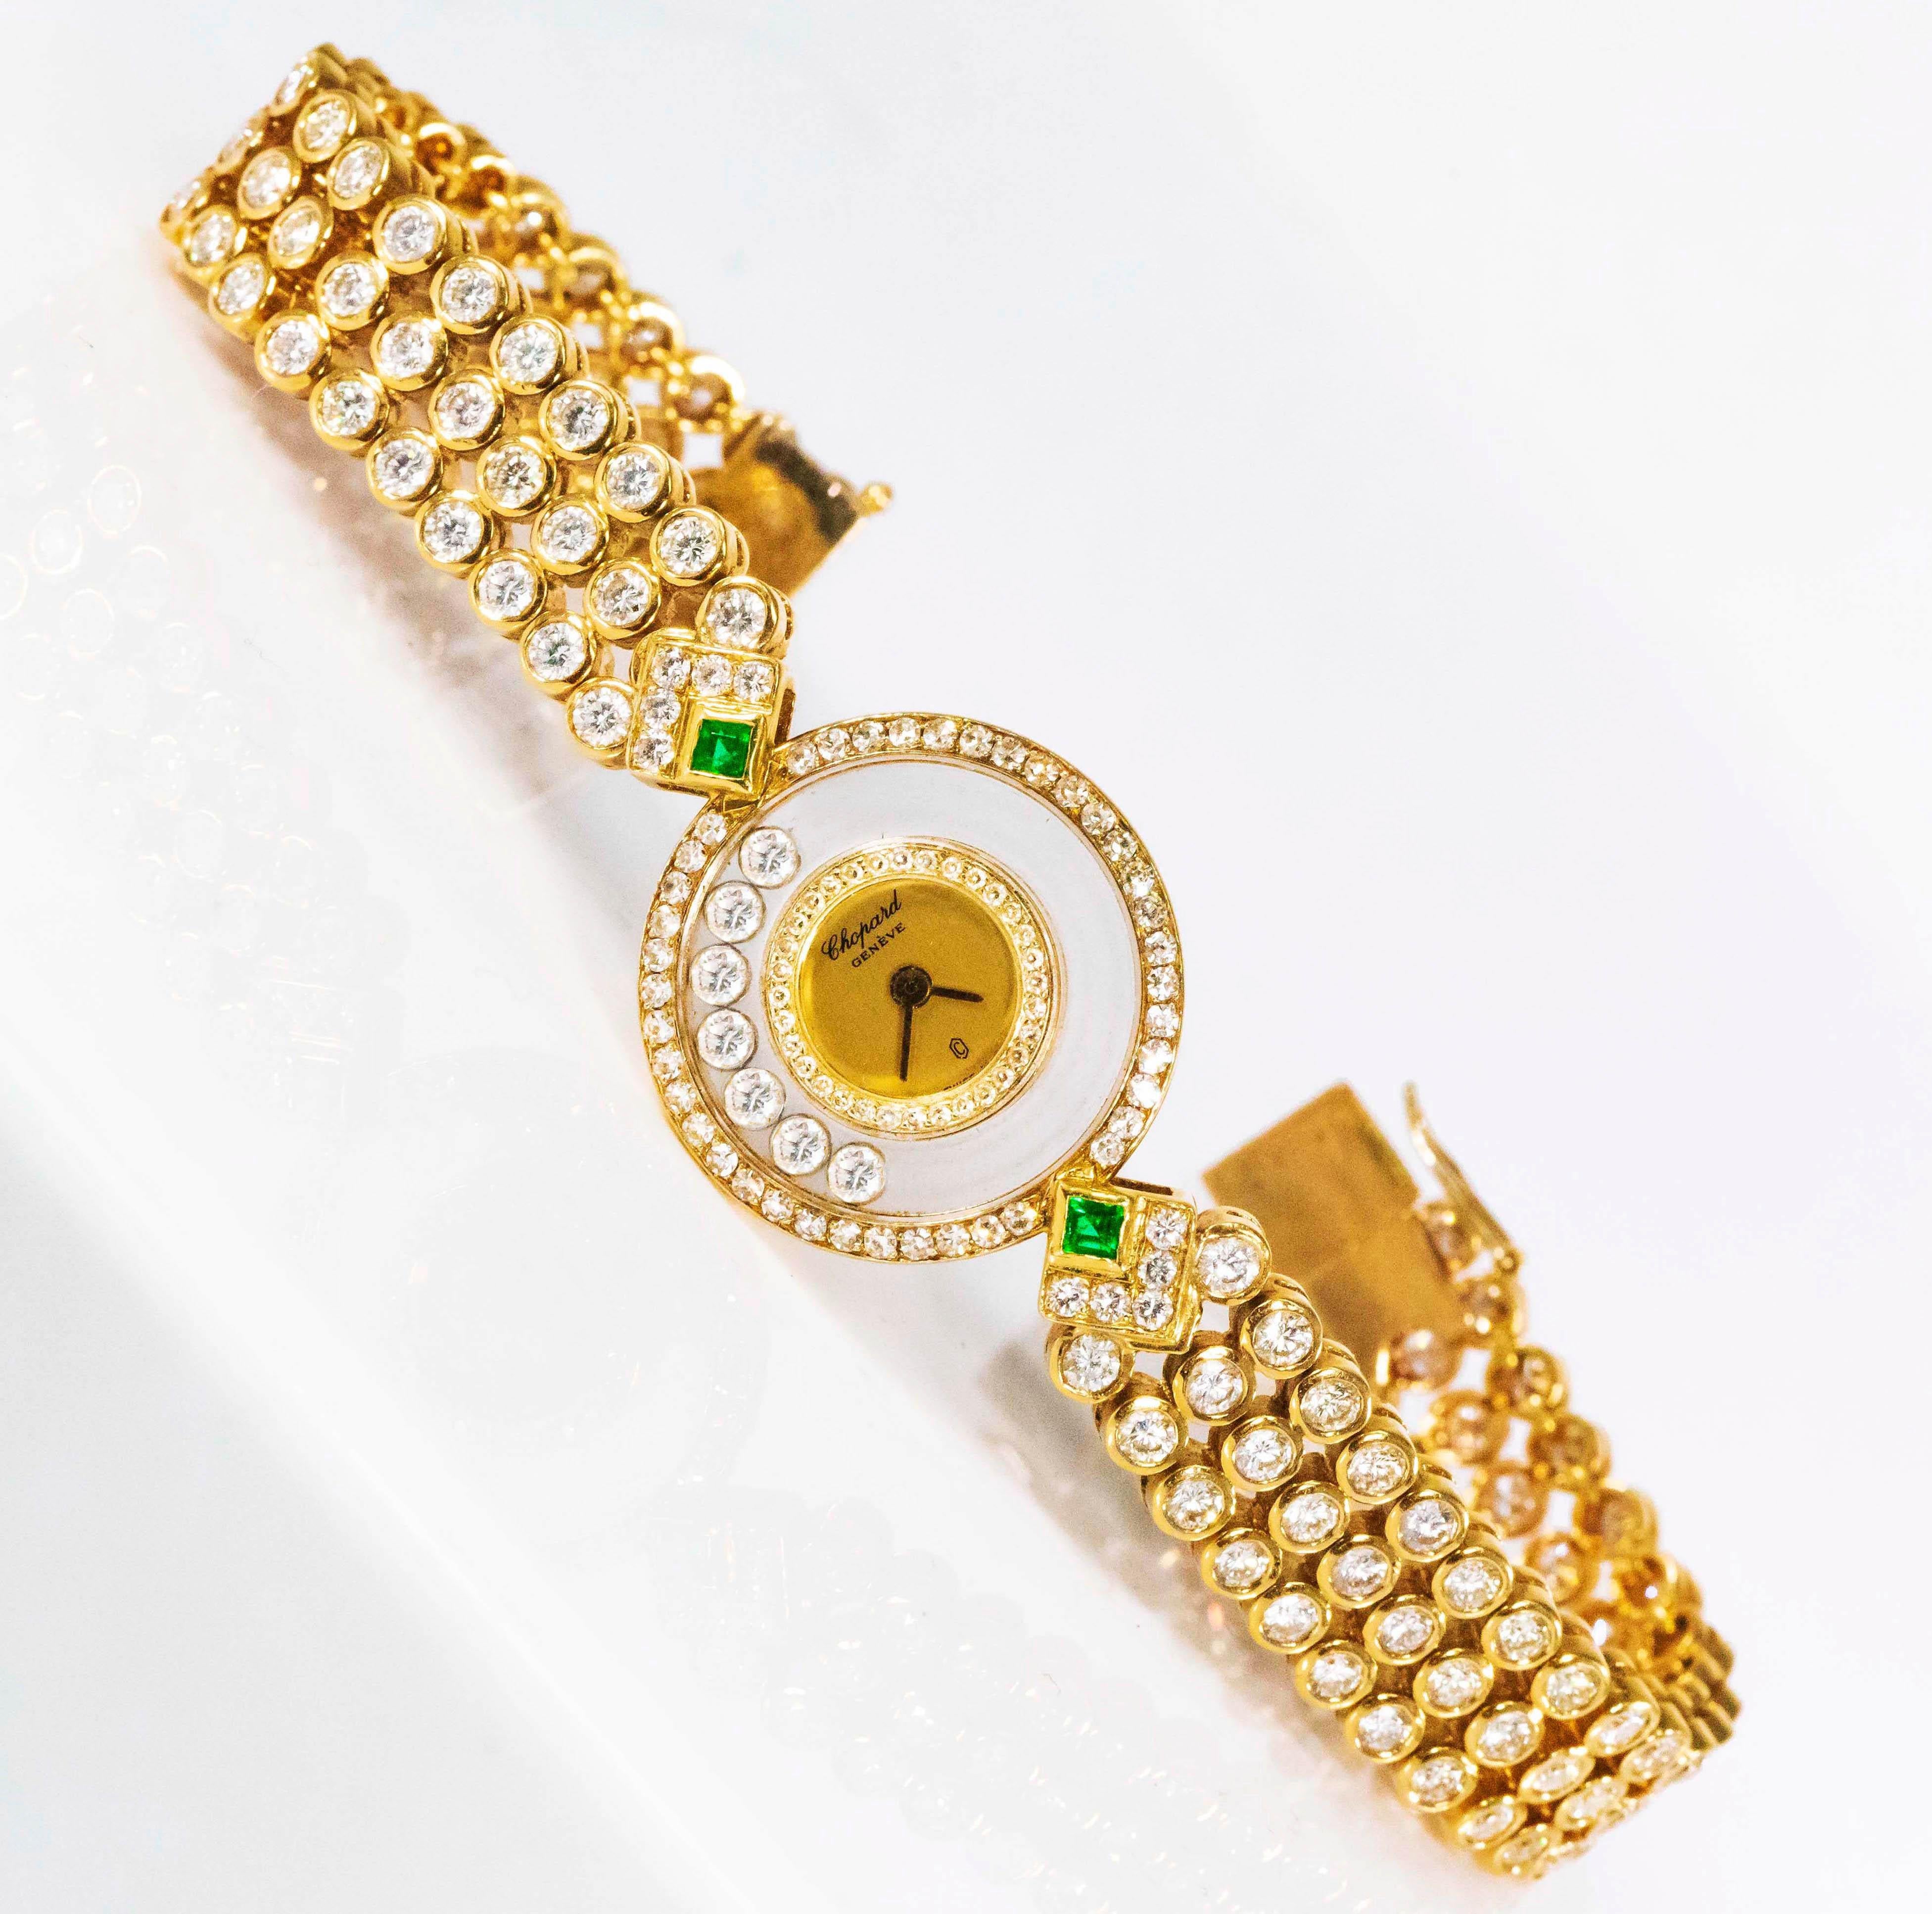 FRESH TO THE MARKET - A Very Rare Possibly Piece Unique, Special design 1980s 18kt Chopard Triple Diamond Row & Emerald Set “Happy Diamond” Bracelet Watch
 - With 175 round cut diamonds totaling approximately 14 carats (original retail approximately